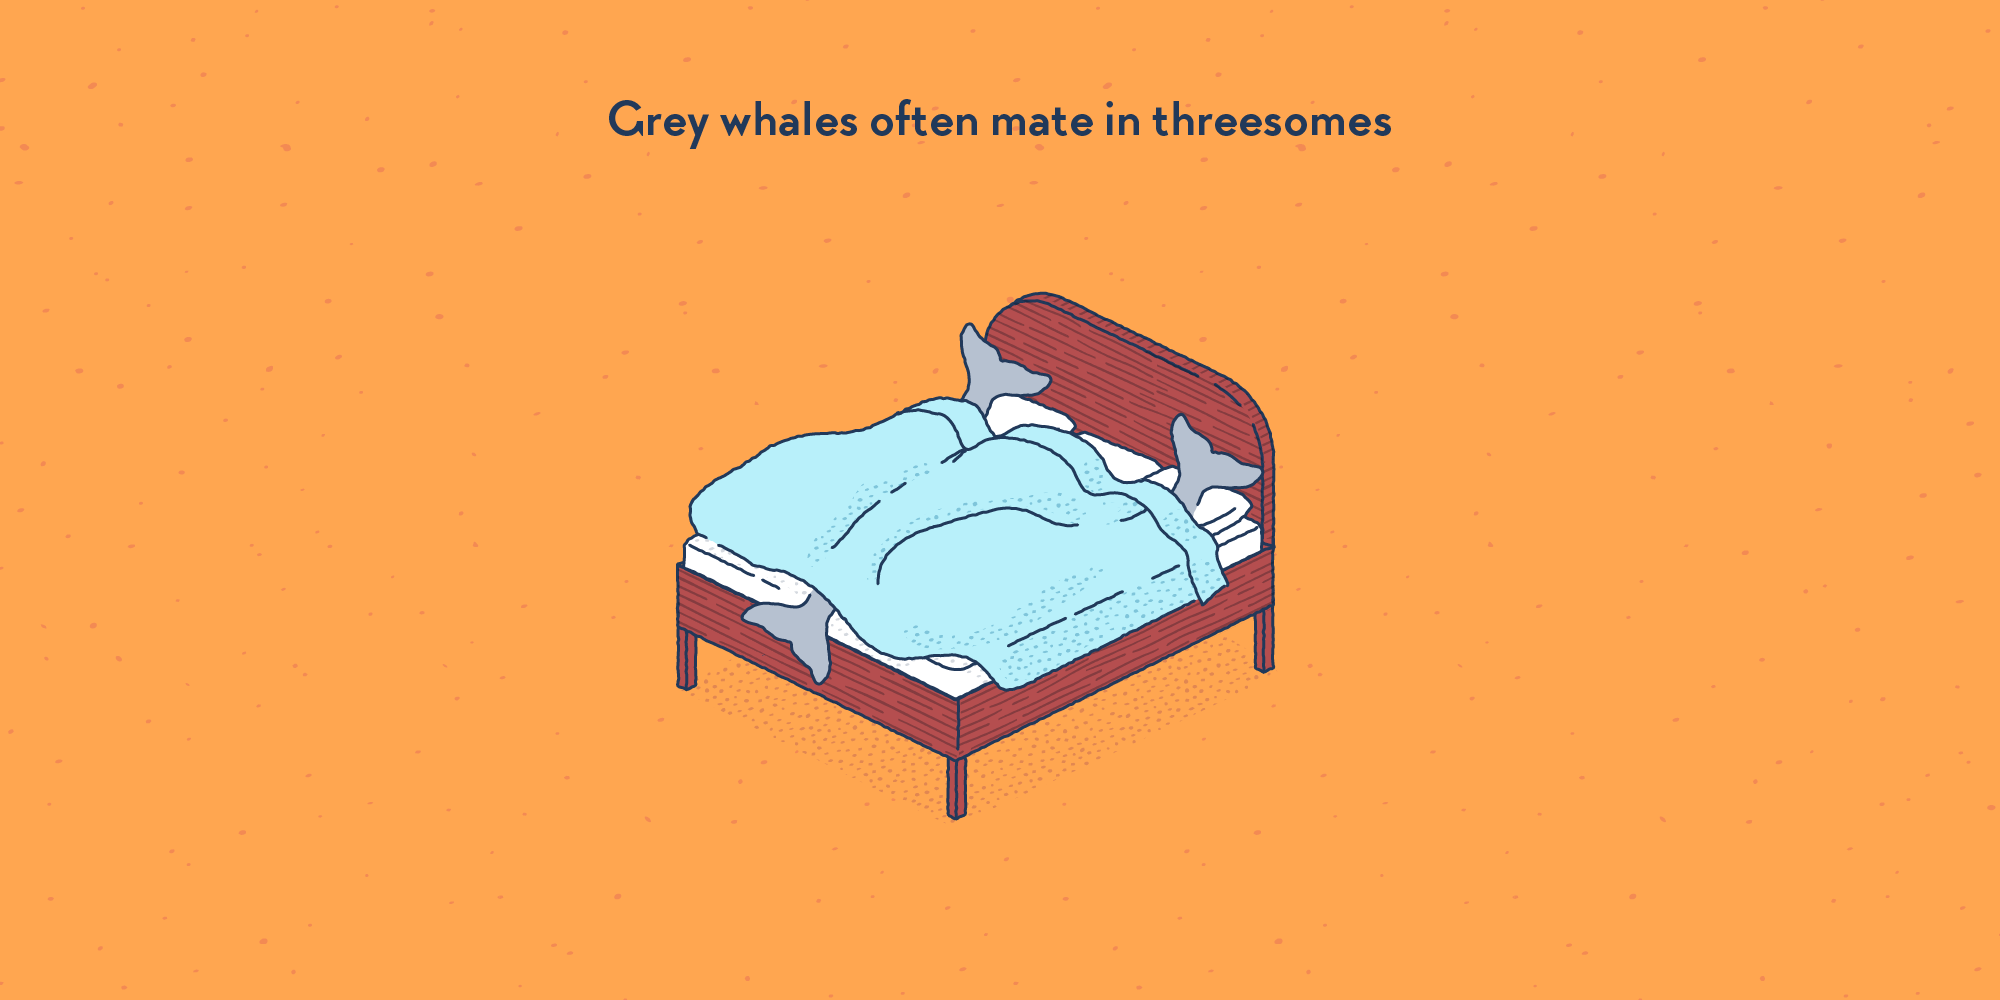 A big bed with three whales in it, hidden under the cover.